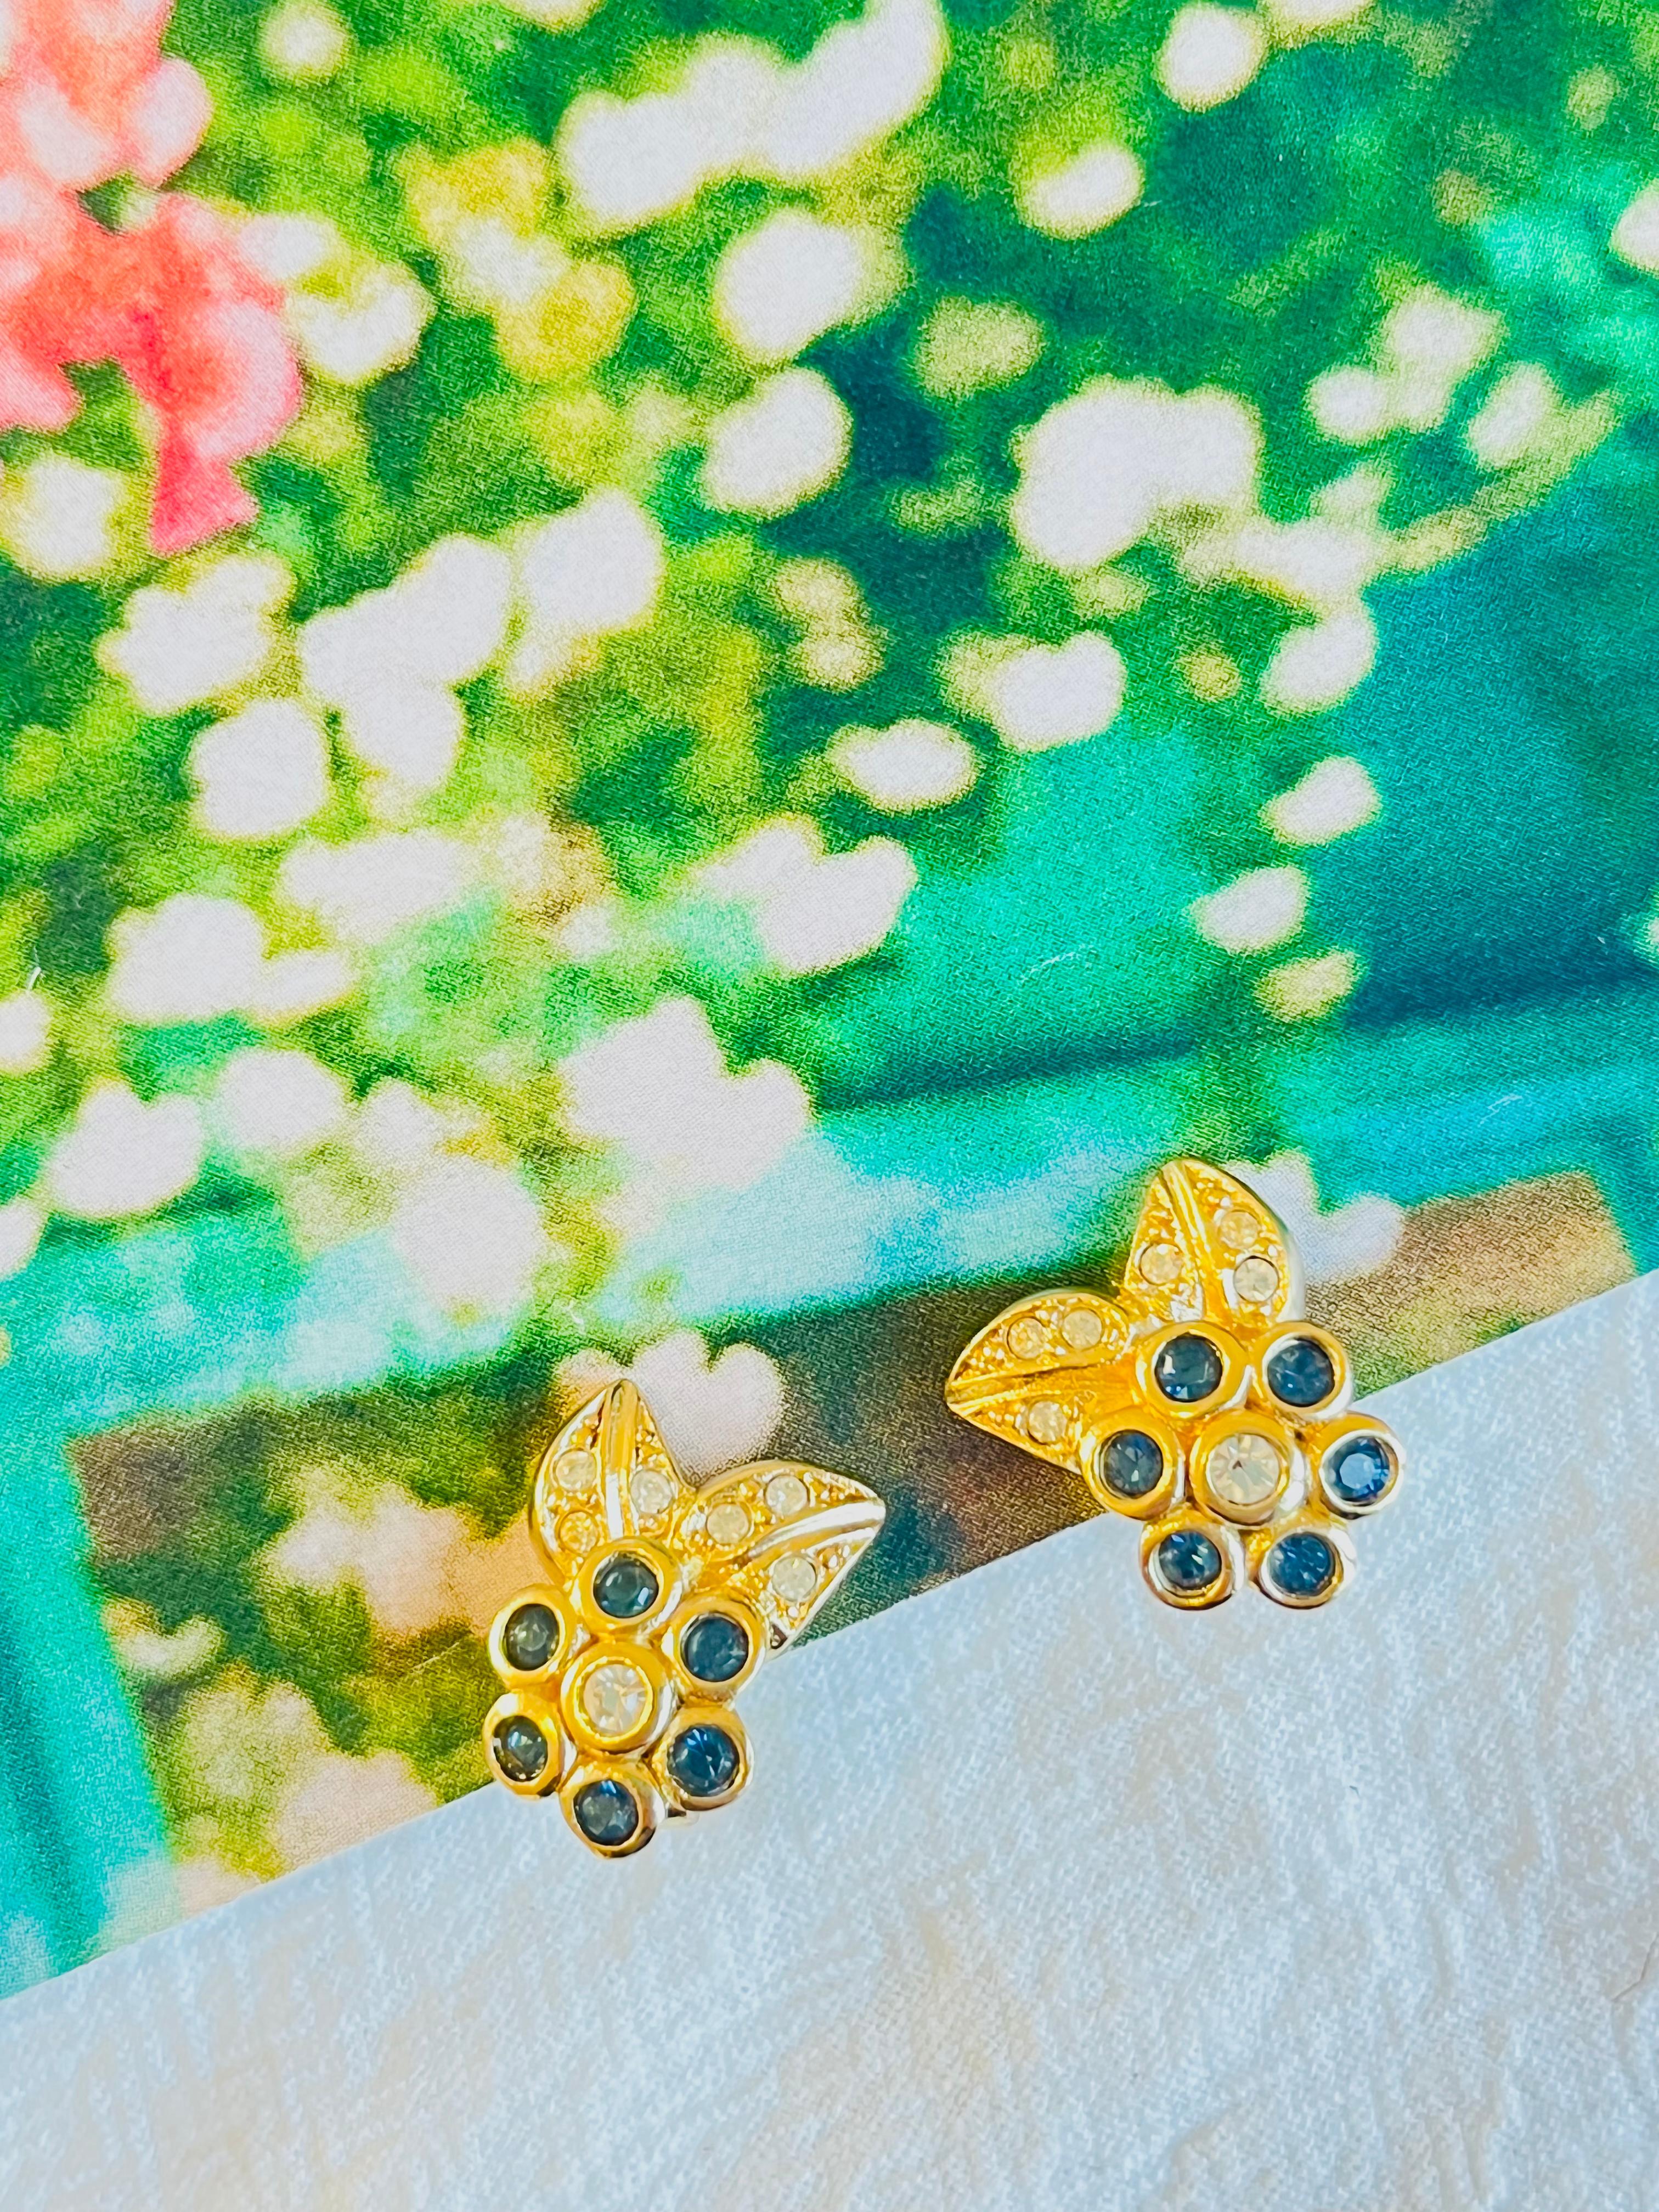 Very excellent condition. 100% Genuine. Rare to find.

A very beautiful pair of earrings by Chr. DIOR, signed at the back.

Size: 1.5*1.3 cm.

Weight: 3.5 g/each.

_ _ _

Great for everyday wear. Come with velvet pouch and beautiful package.

Makes